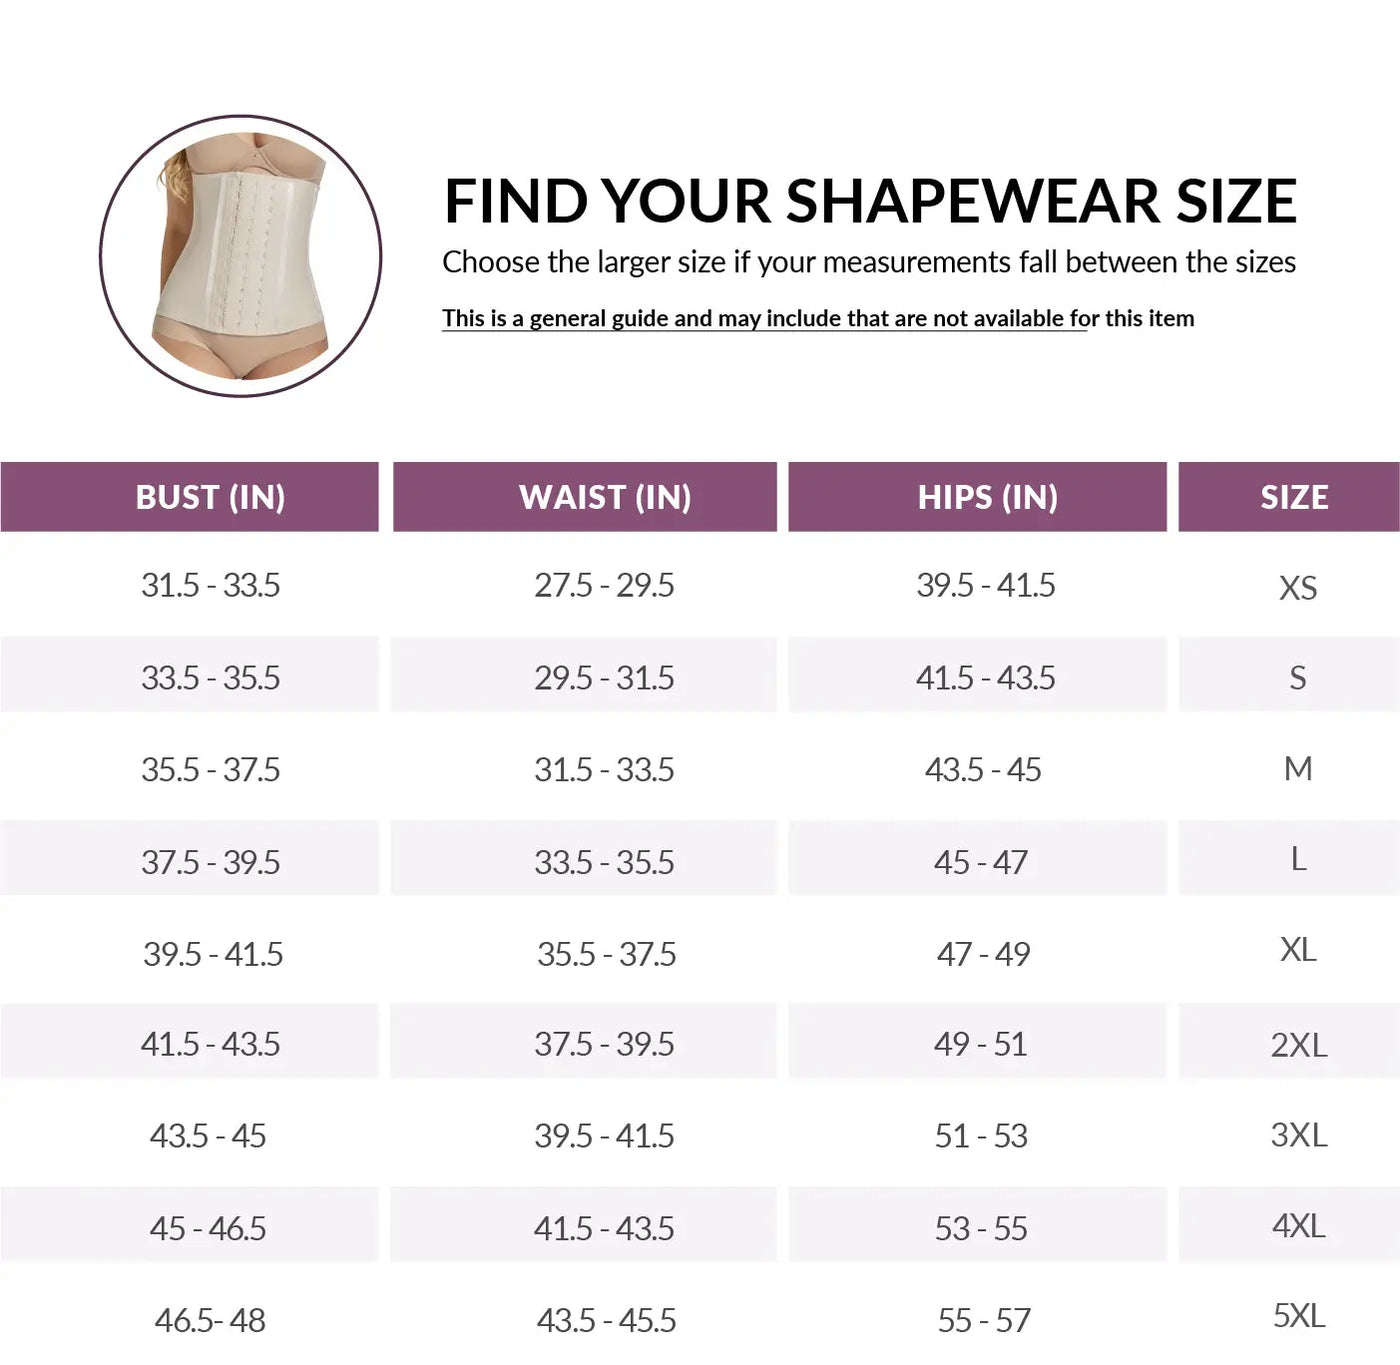 How to Measure Your Shapewear Size